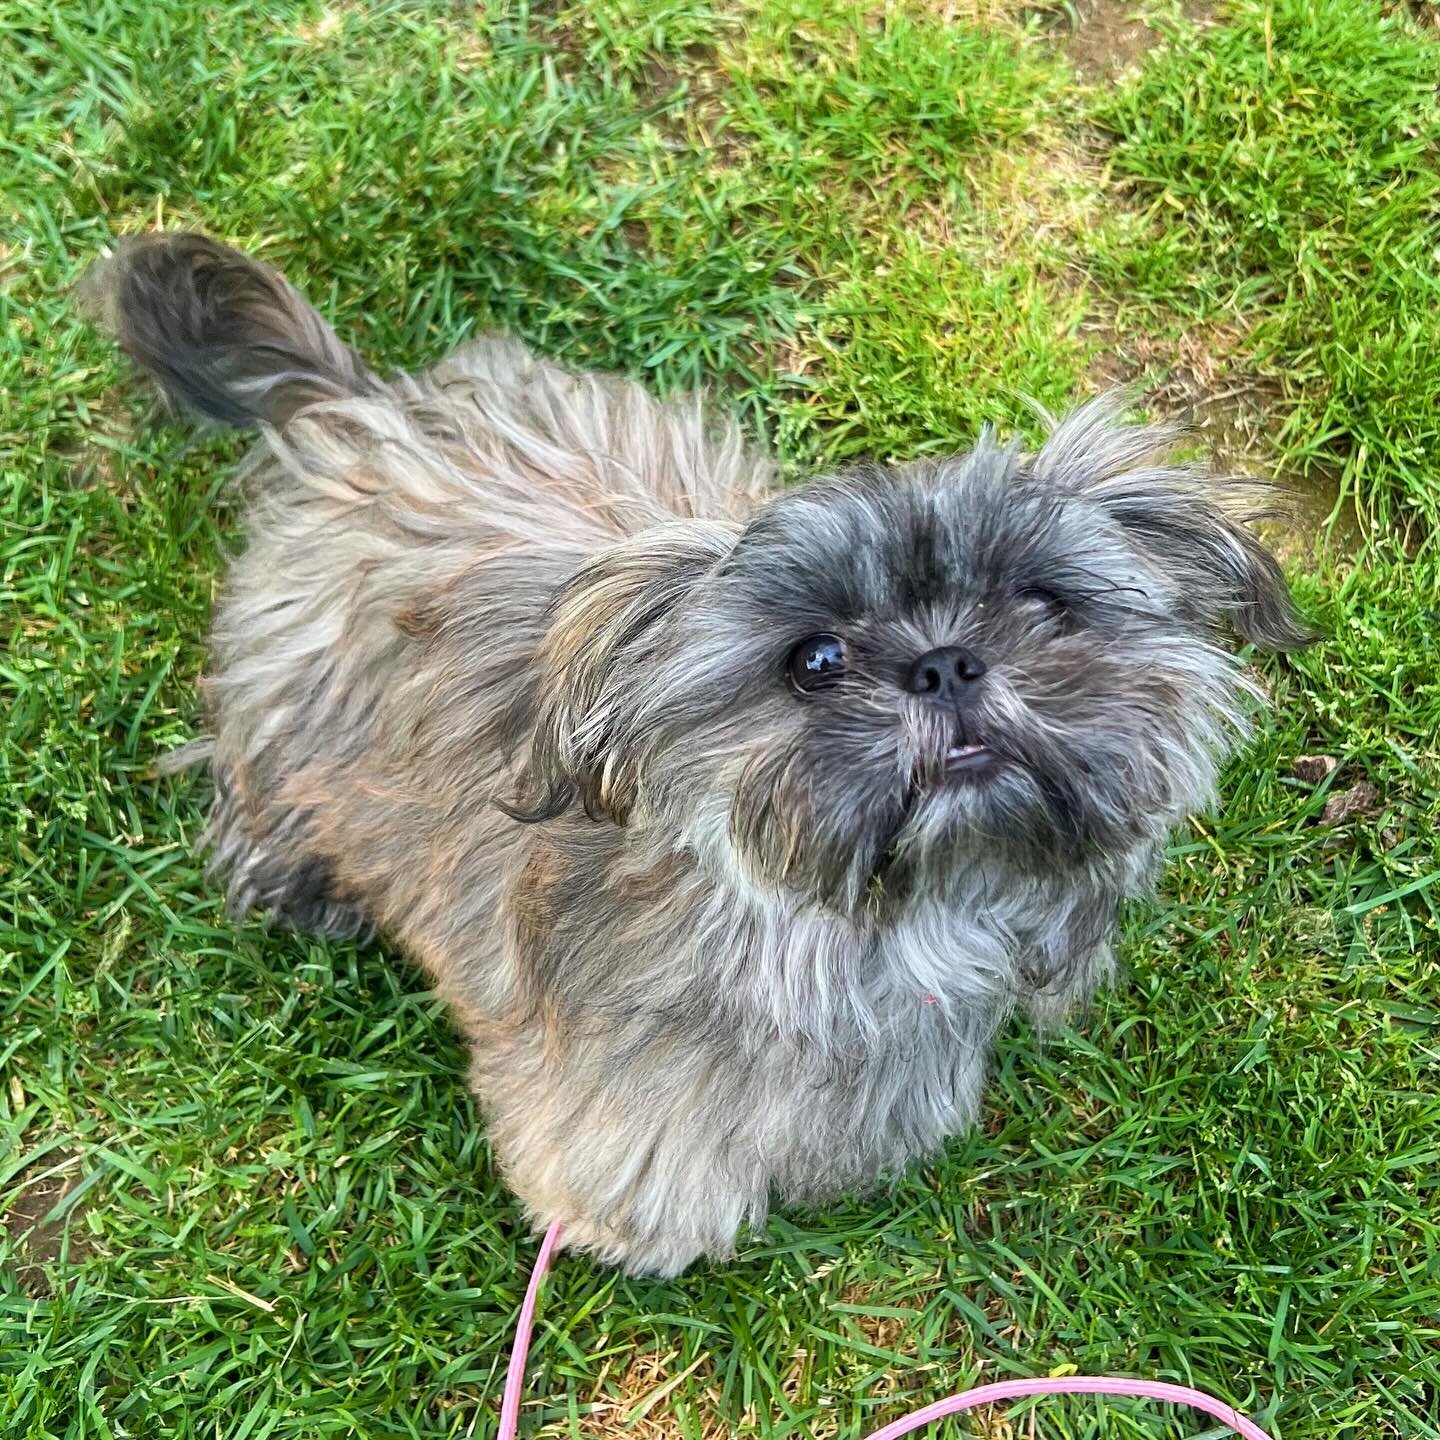 Meet Kelsey the 5 month old Shih Tzu! 🐶 This sweet girl is full of puppy energy and loves belly rubs!! 💕